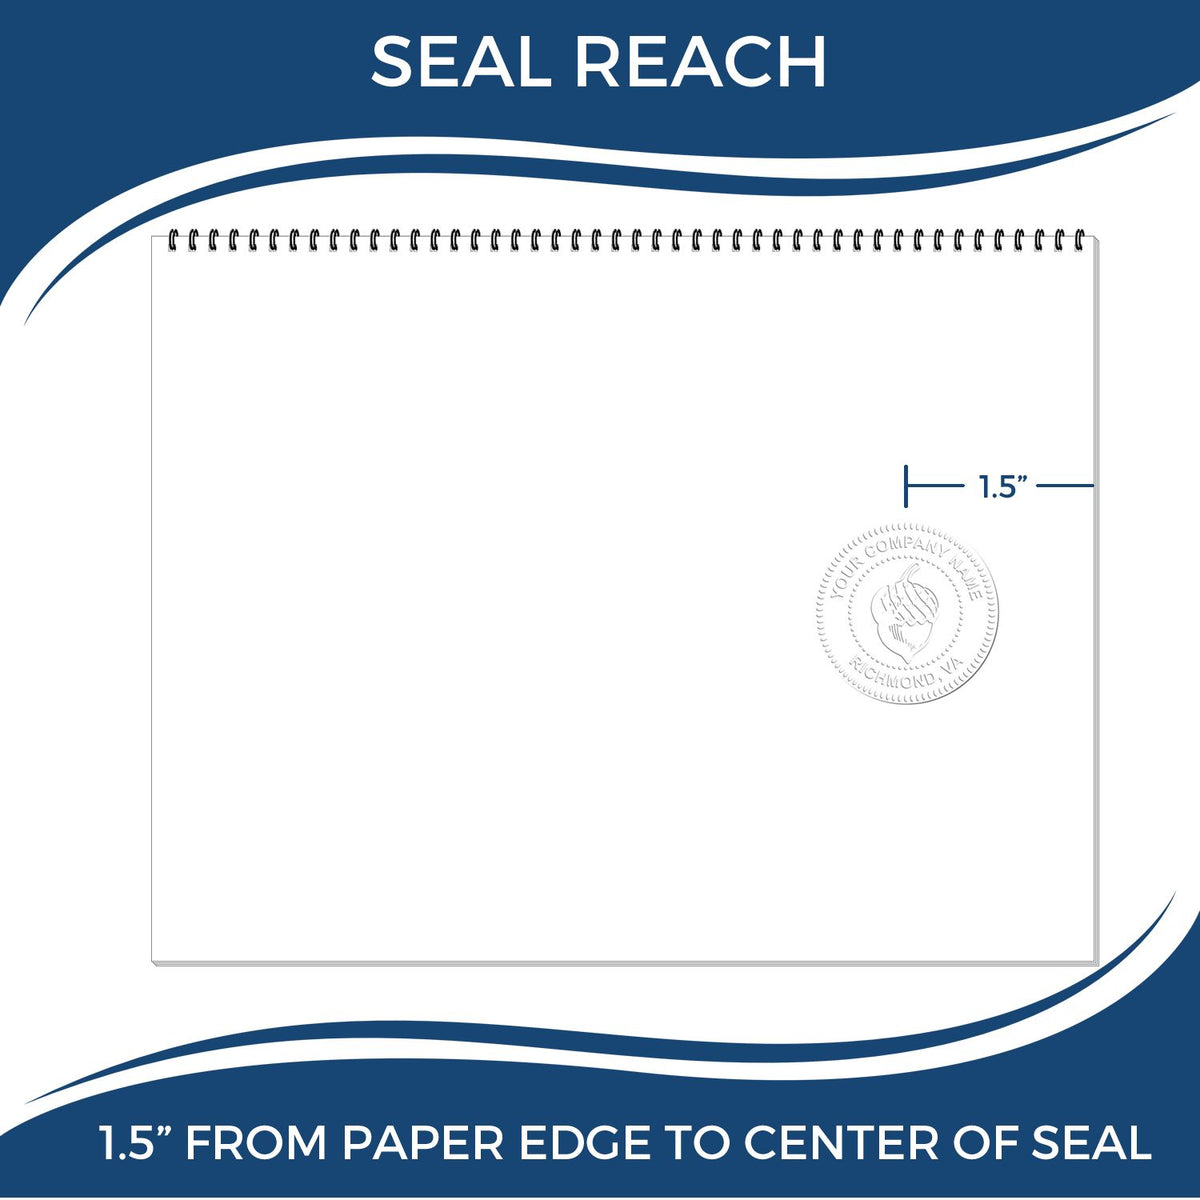 An infographic showing the seal reach which is represented by a ruler and a miniature seal image of the Handheld Tennessee Professional Geologist Embosser